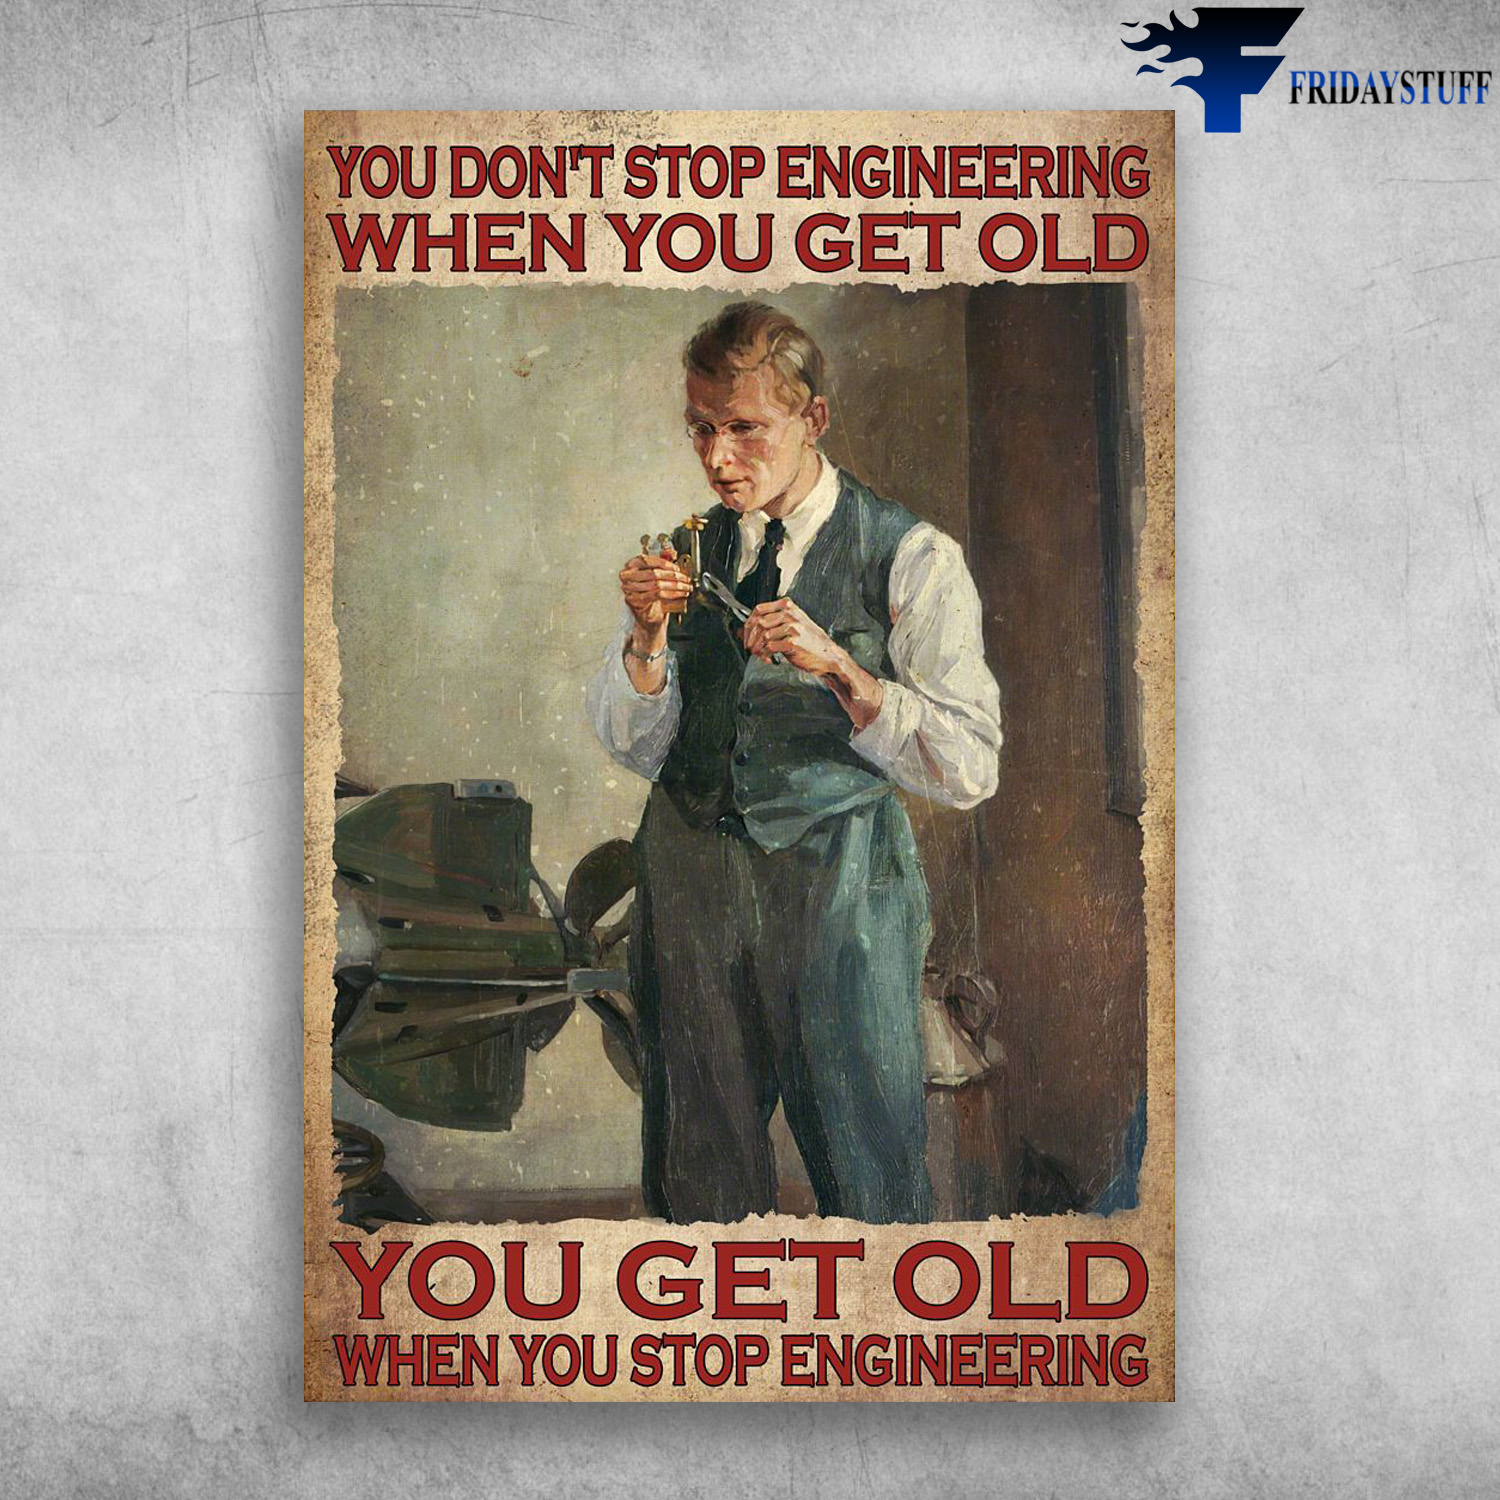 Man Engineering - You Don't Stop Engineering When You Get Old, You Get Old When You Engineering